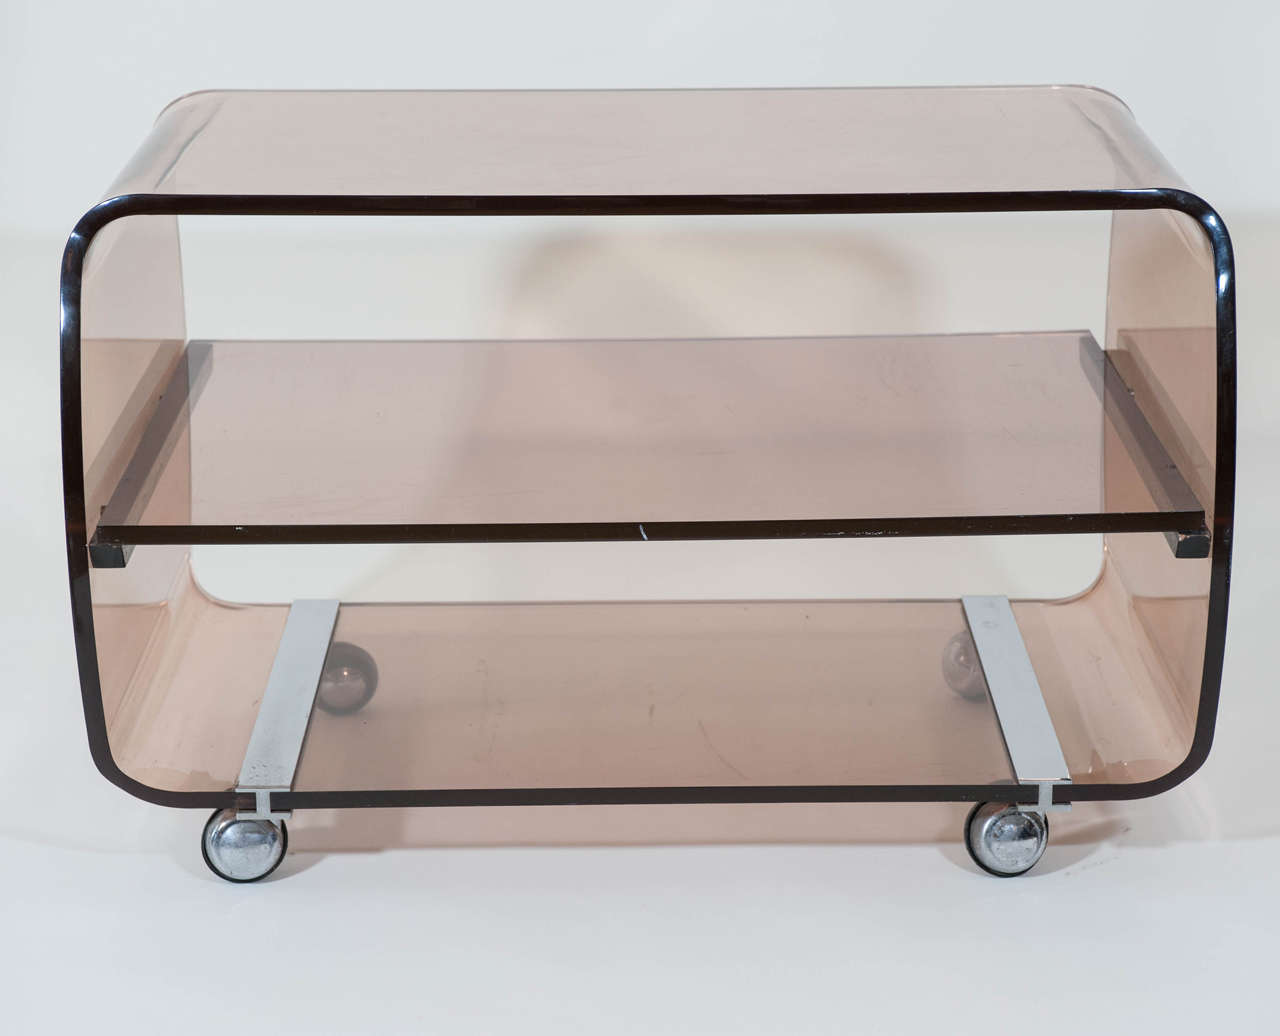 A chic trolley or TV stand in a rose colored hue with original hardware and castors.